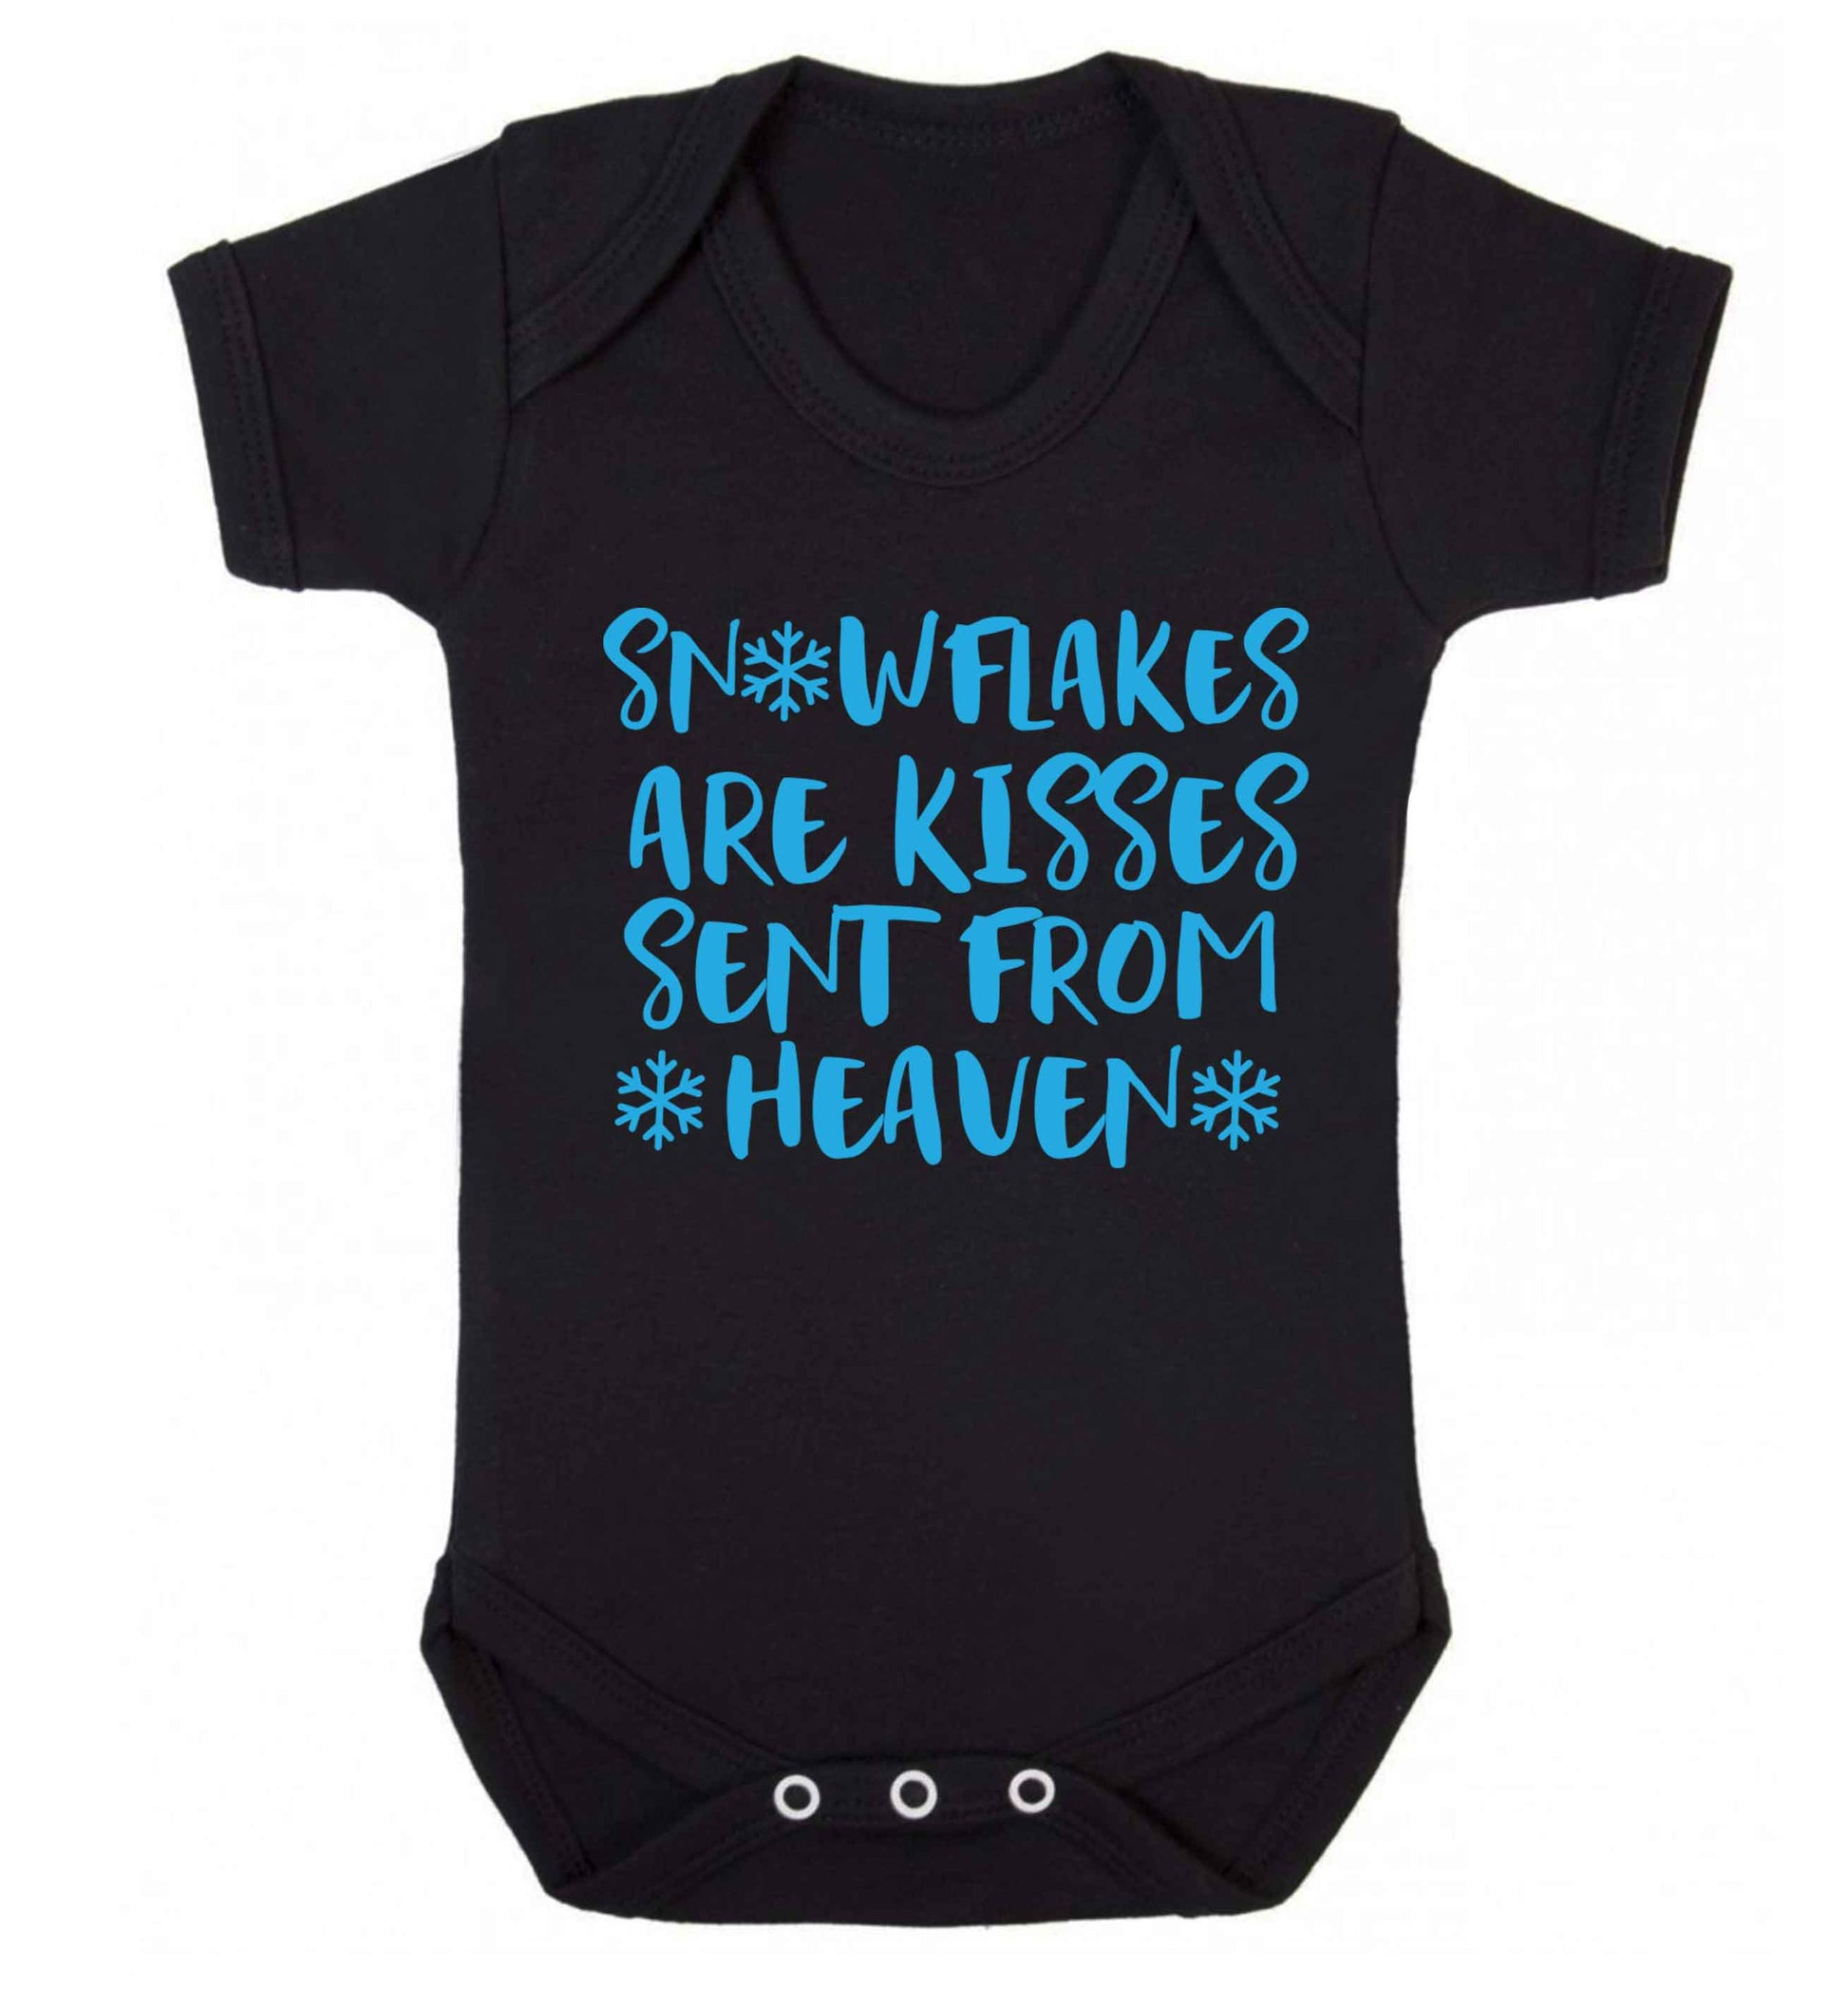 Snowflakes are kisses sent from heaven Baby Vest black 18-24 months